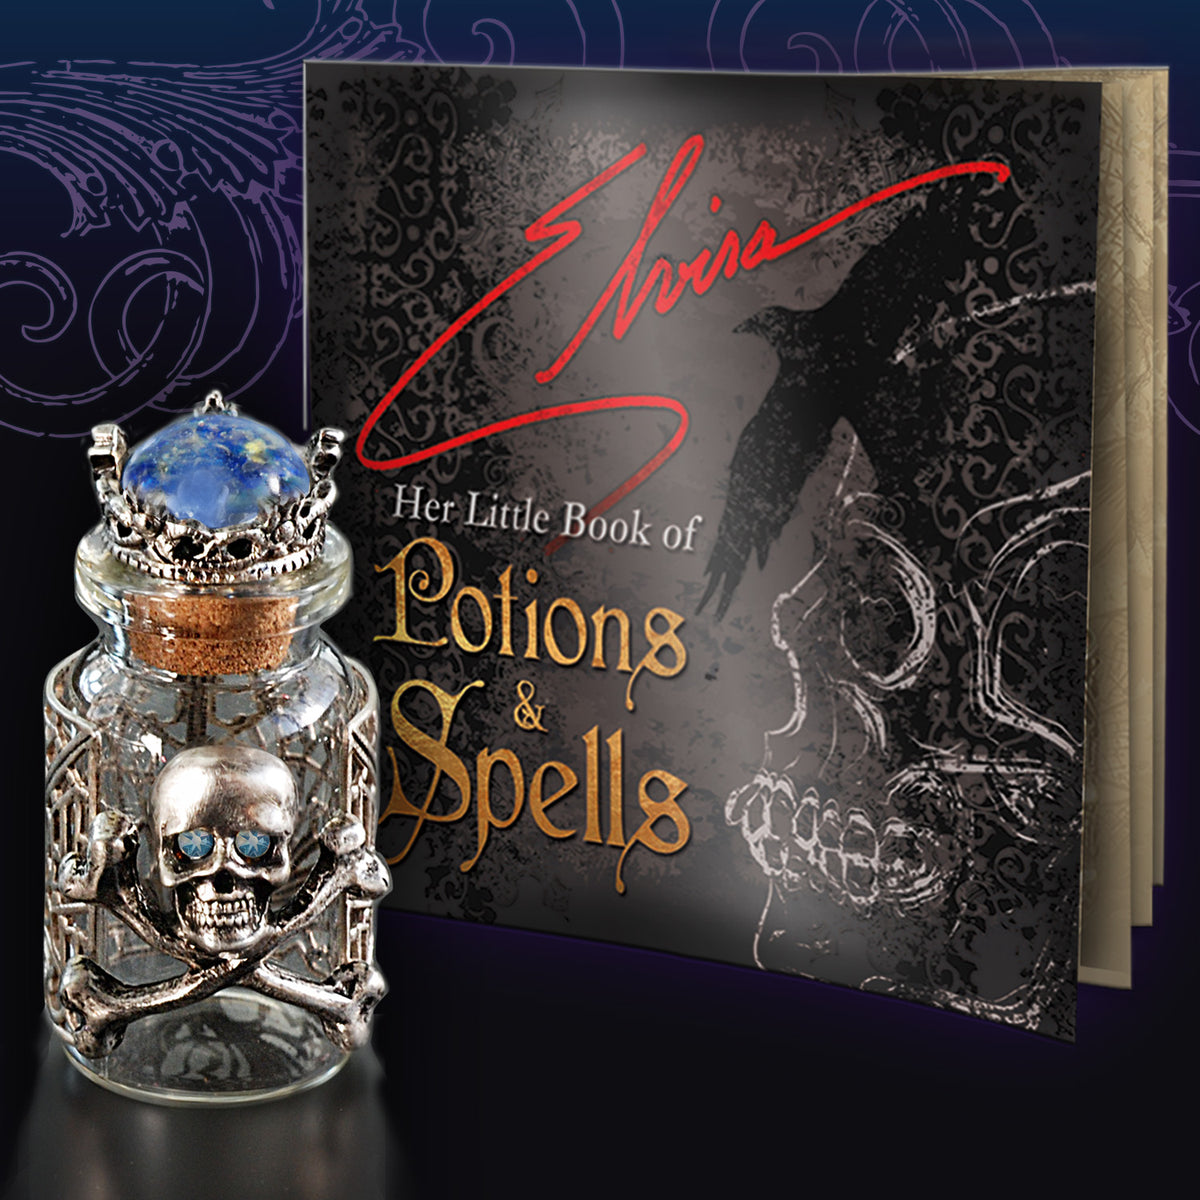 NEW! Limited Edition Elvira's Poison Bottles - Intuition - sweetromanceonlinejewelry